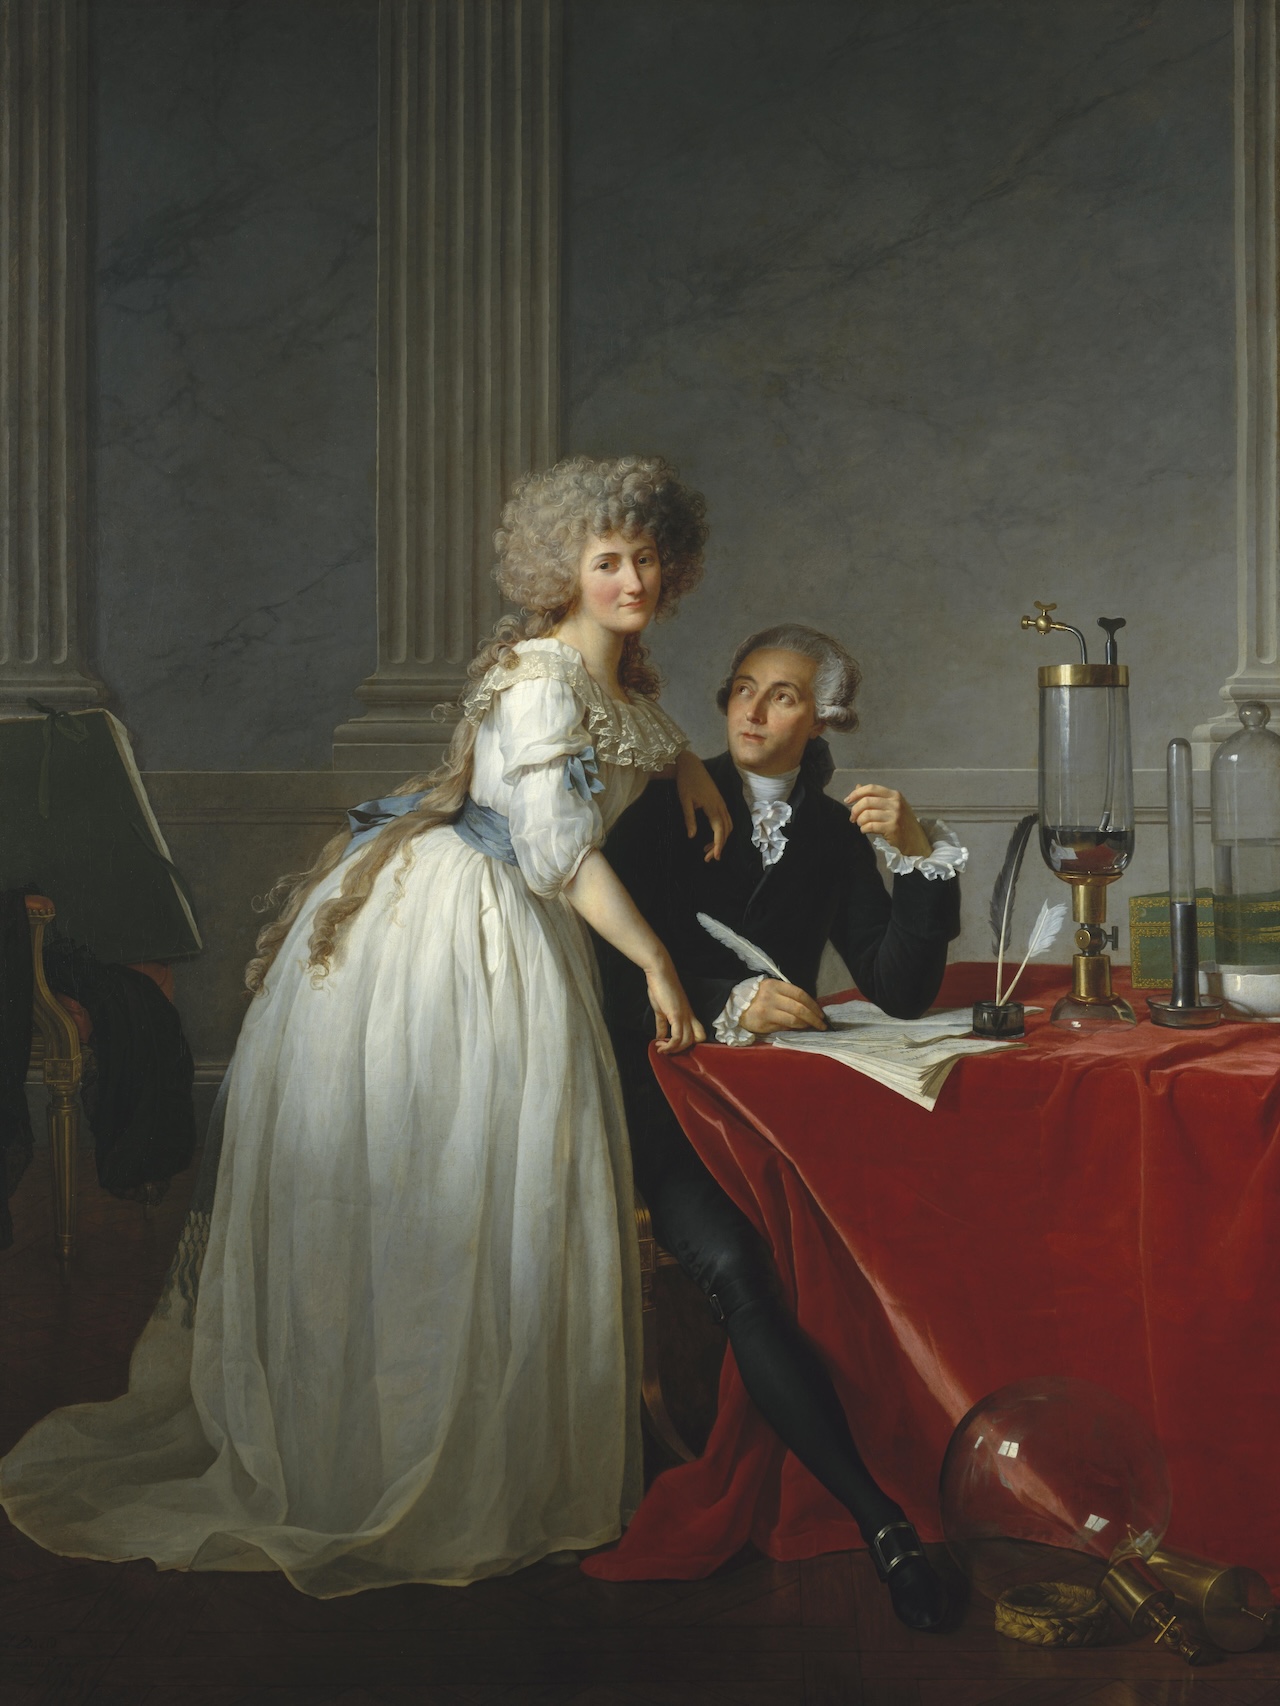 Madame Lavoisier opened new pathways for women in science